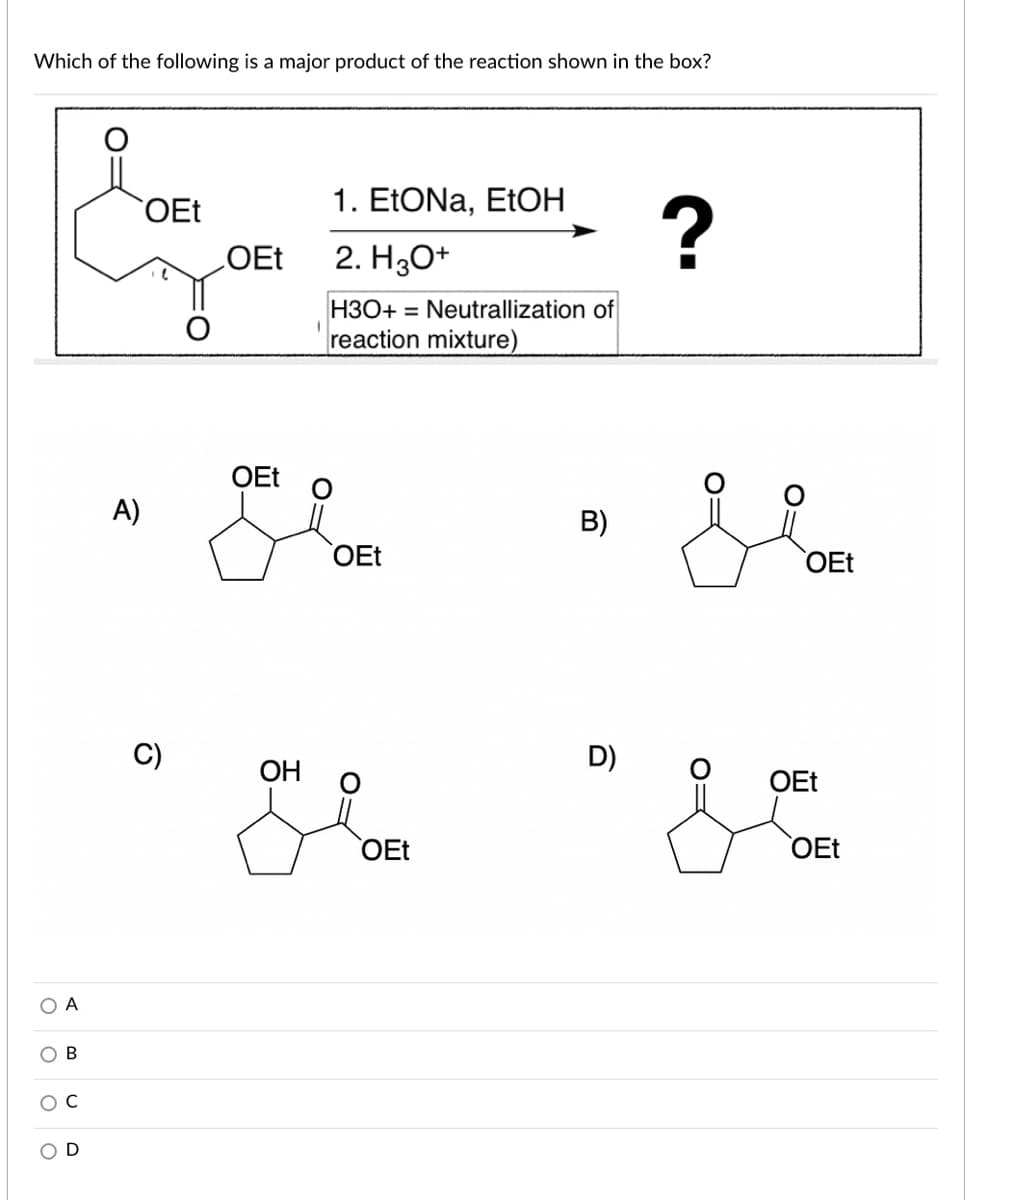 Which of the following is a major product of the reaction shown in the box?
OEt
1. EEONA, ETOH
2. H30+
H3O+ = Neutrallization of
reaction mixture)
OEt
A)
B)
OEt
OEt
C)
D)
OH
OEt
OEt
OEt
O A
D
O:
